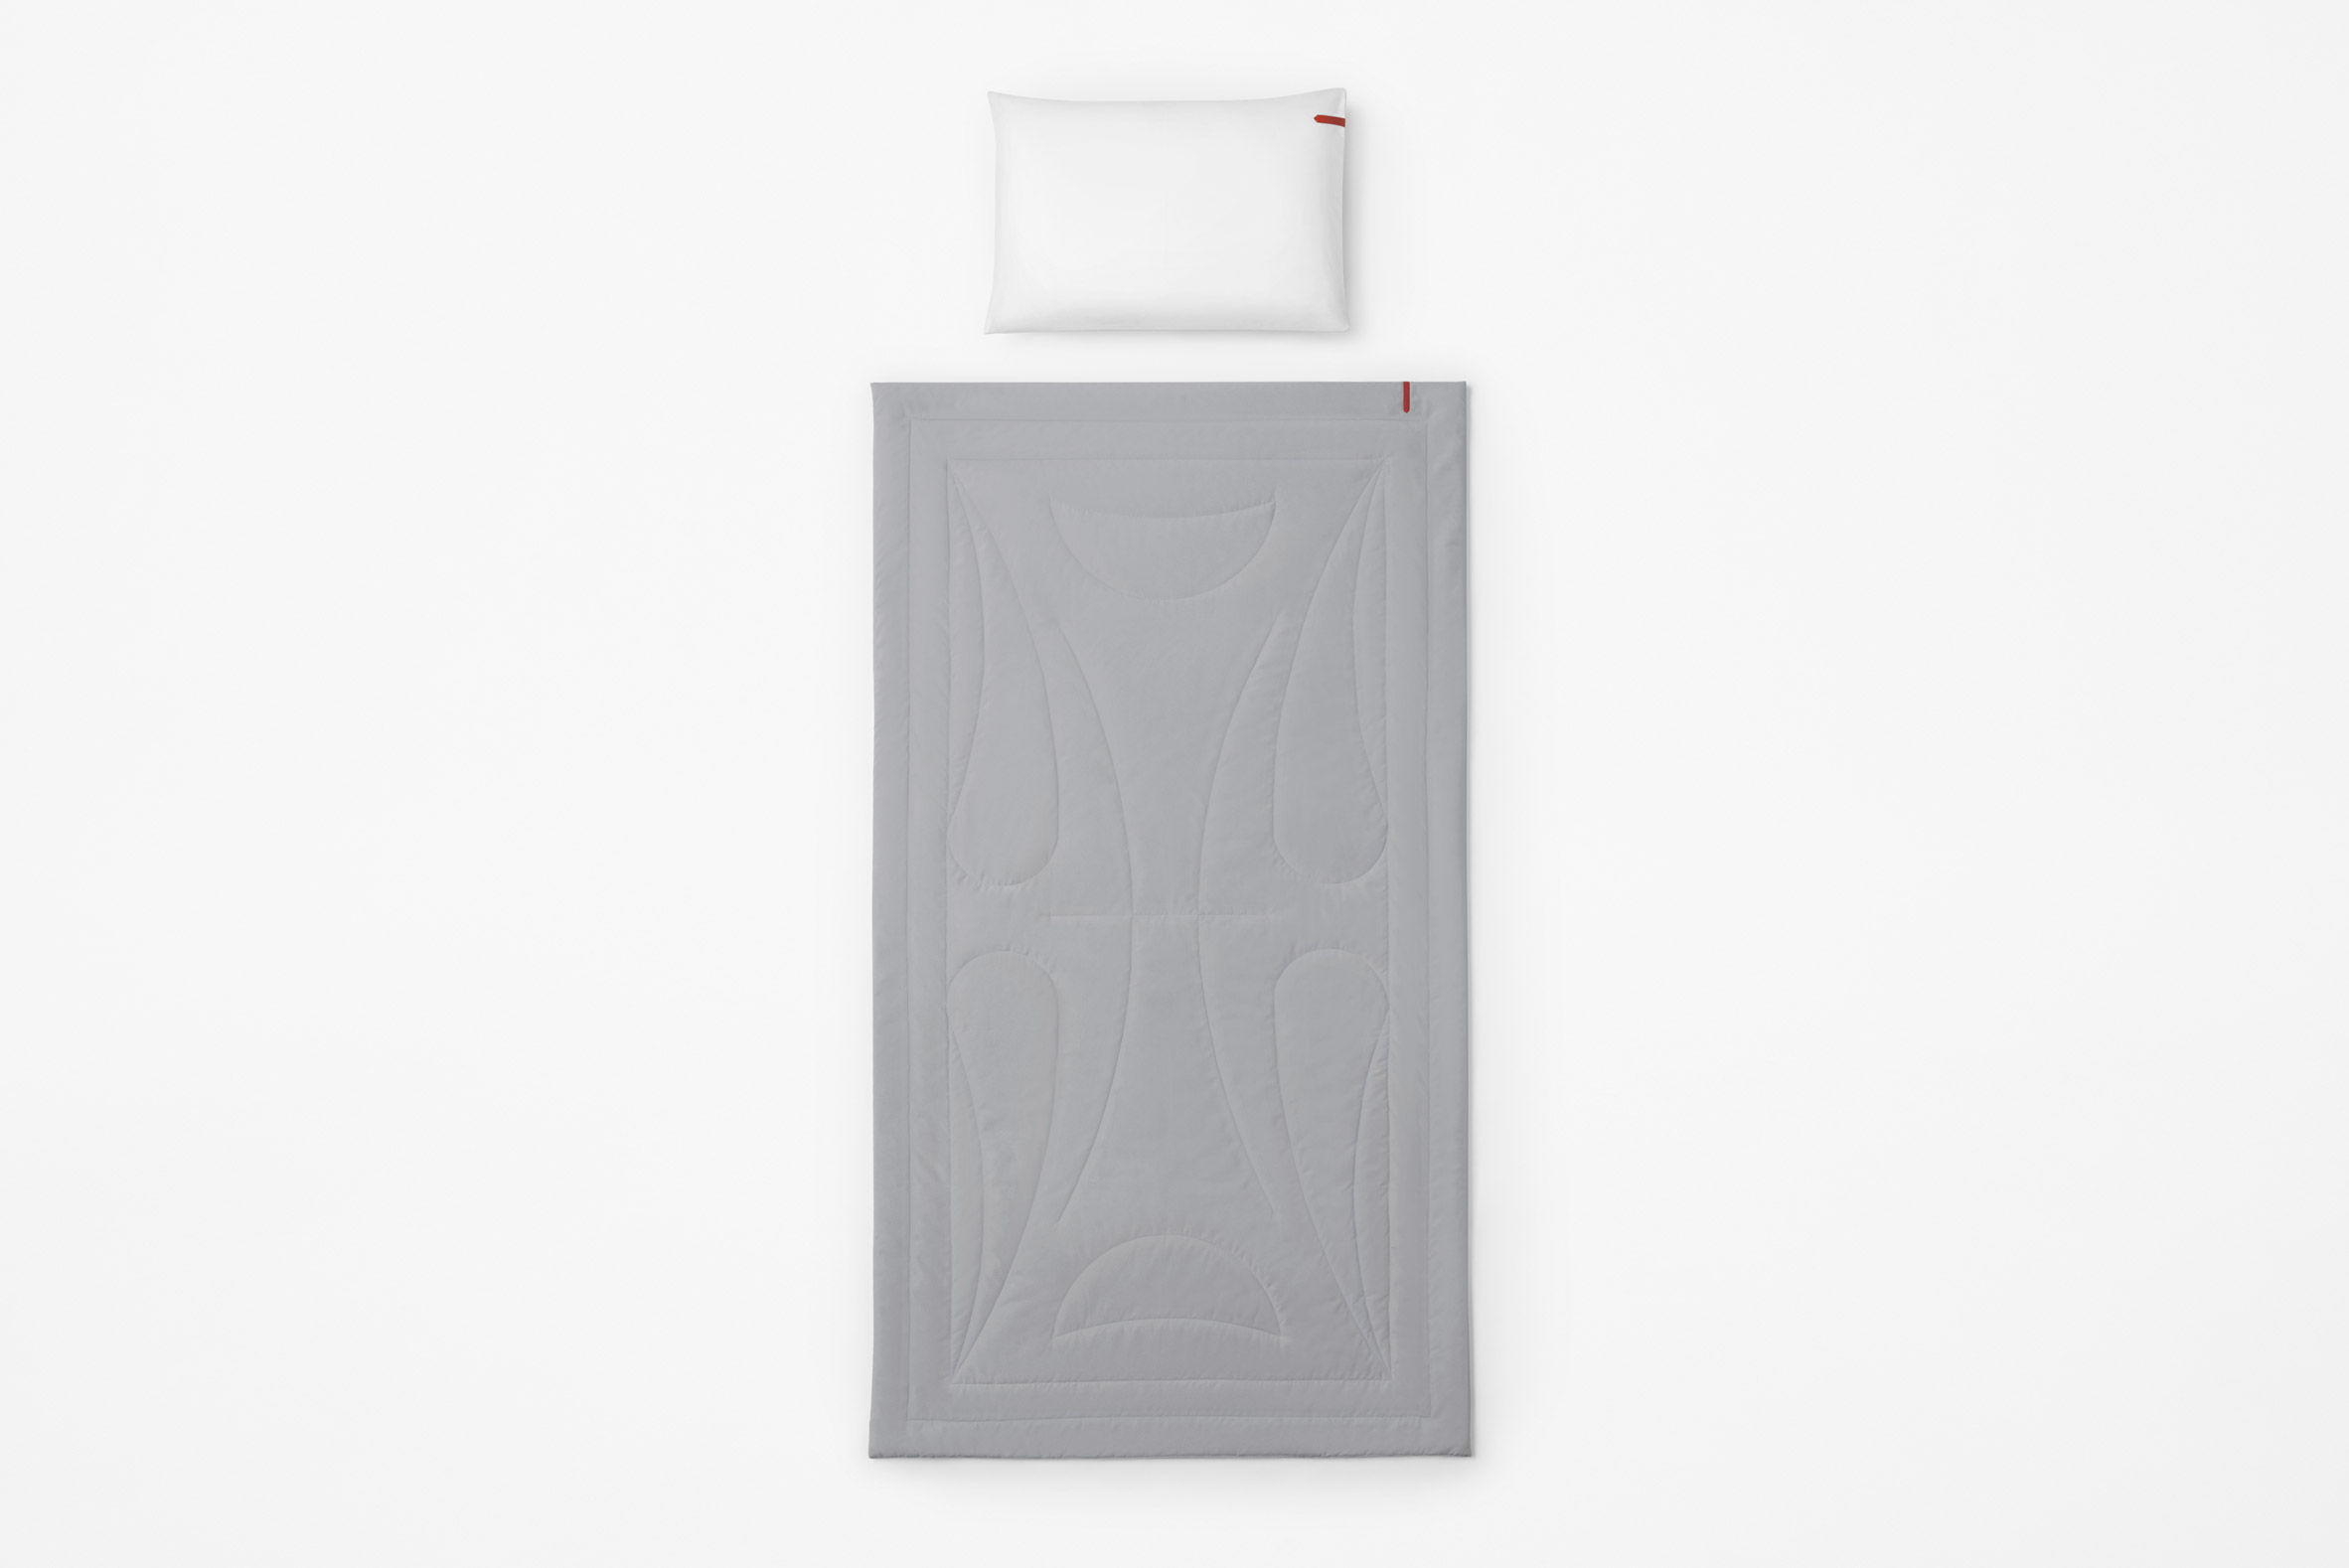 Pillow and blanket by Nendo for Japan Airlines